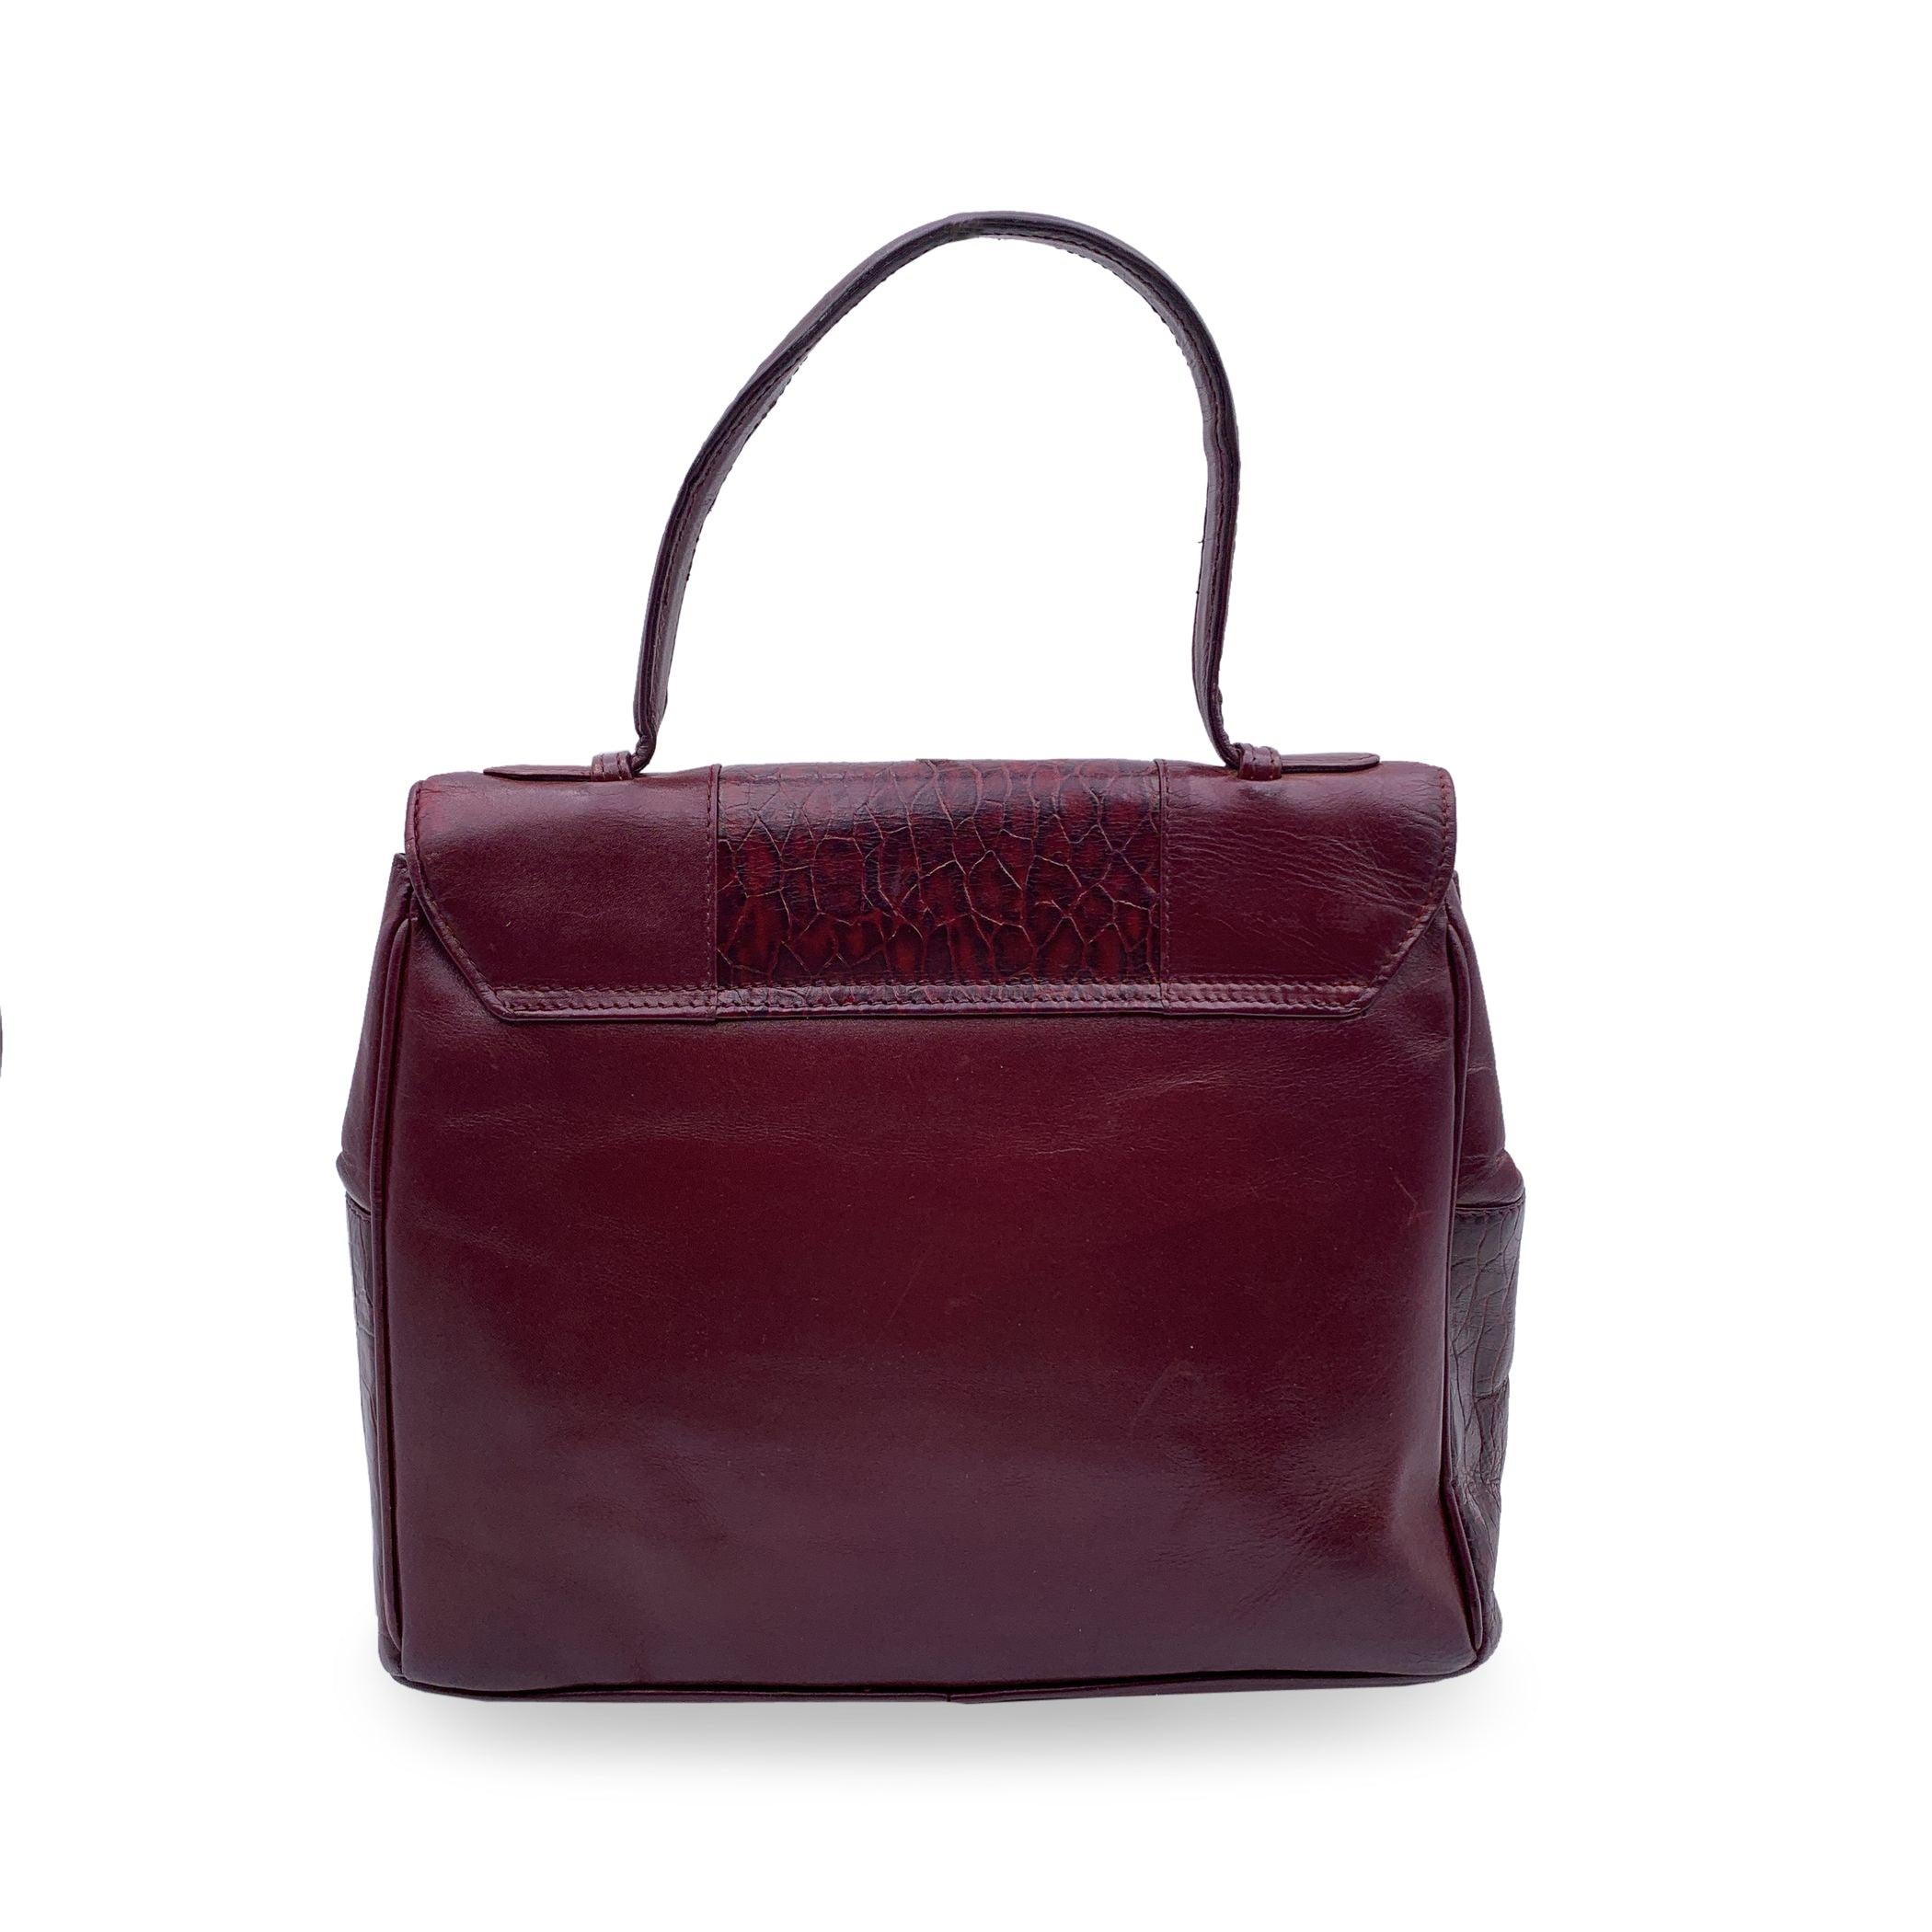 Gianni Versace Vintage Burgundy Embossed Leather Handbag Satchel In Good Condition For Sale In Rome, Rome